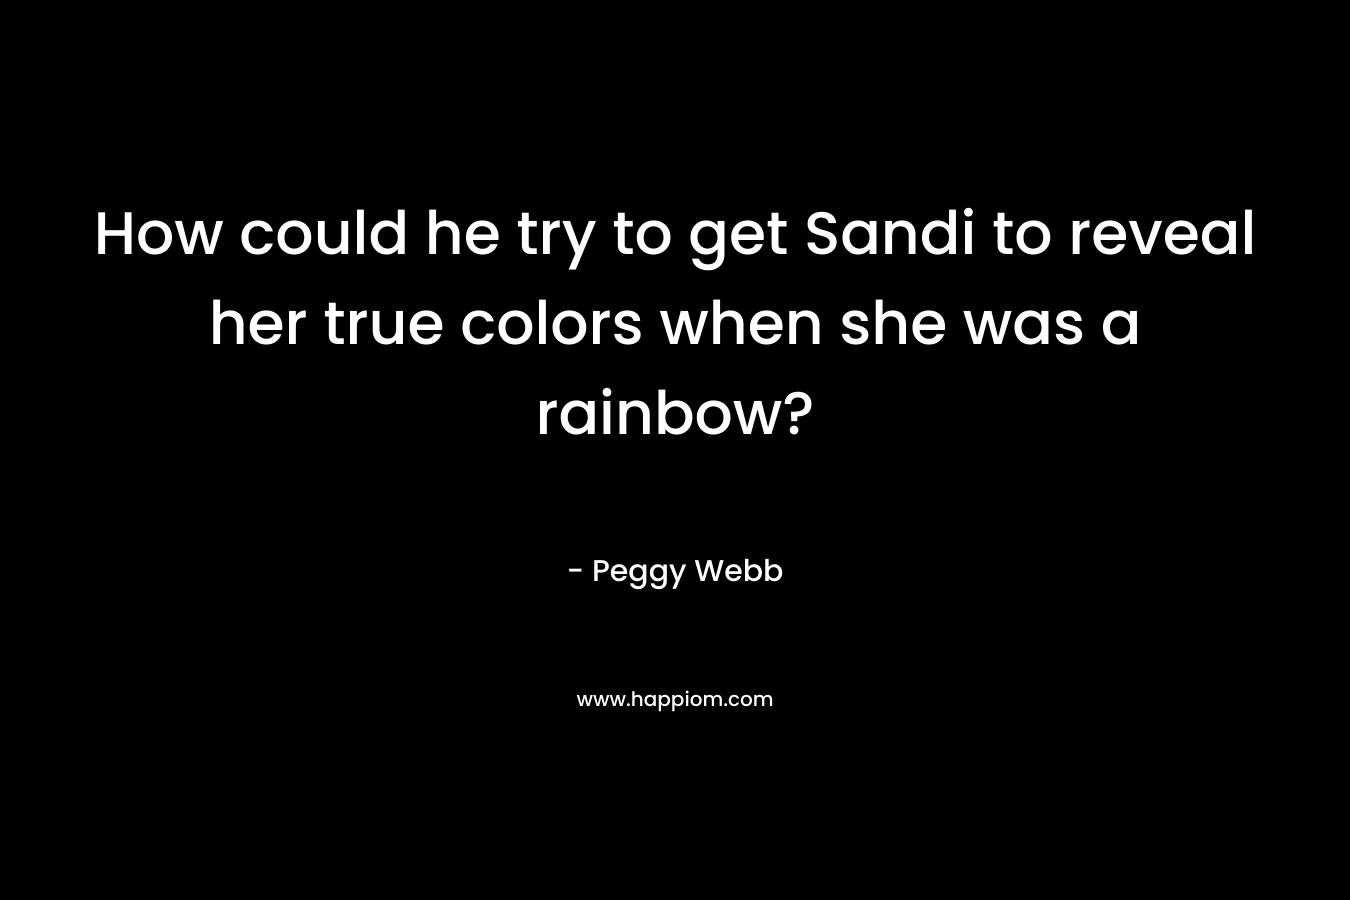 How could he try to get Sandi to reveal her true colors when she was a rainbow? – Peggy Webb